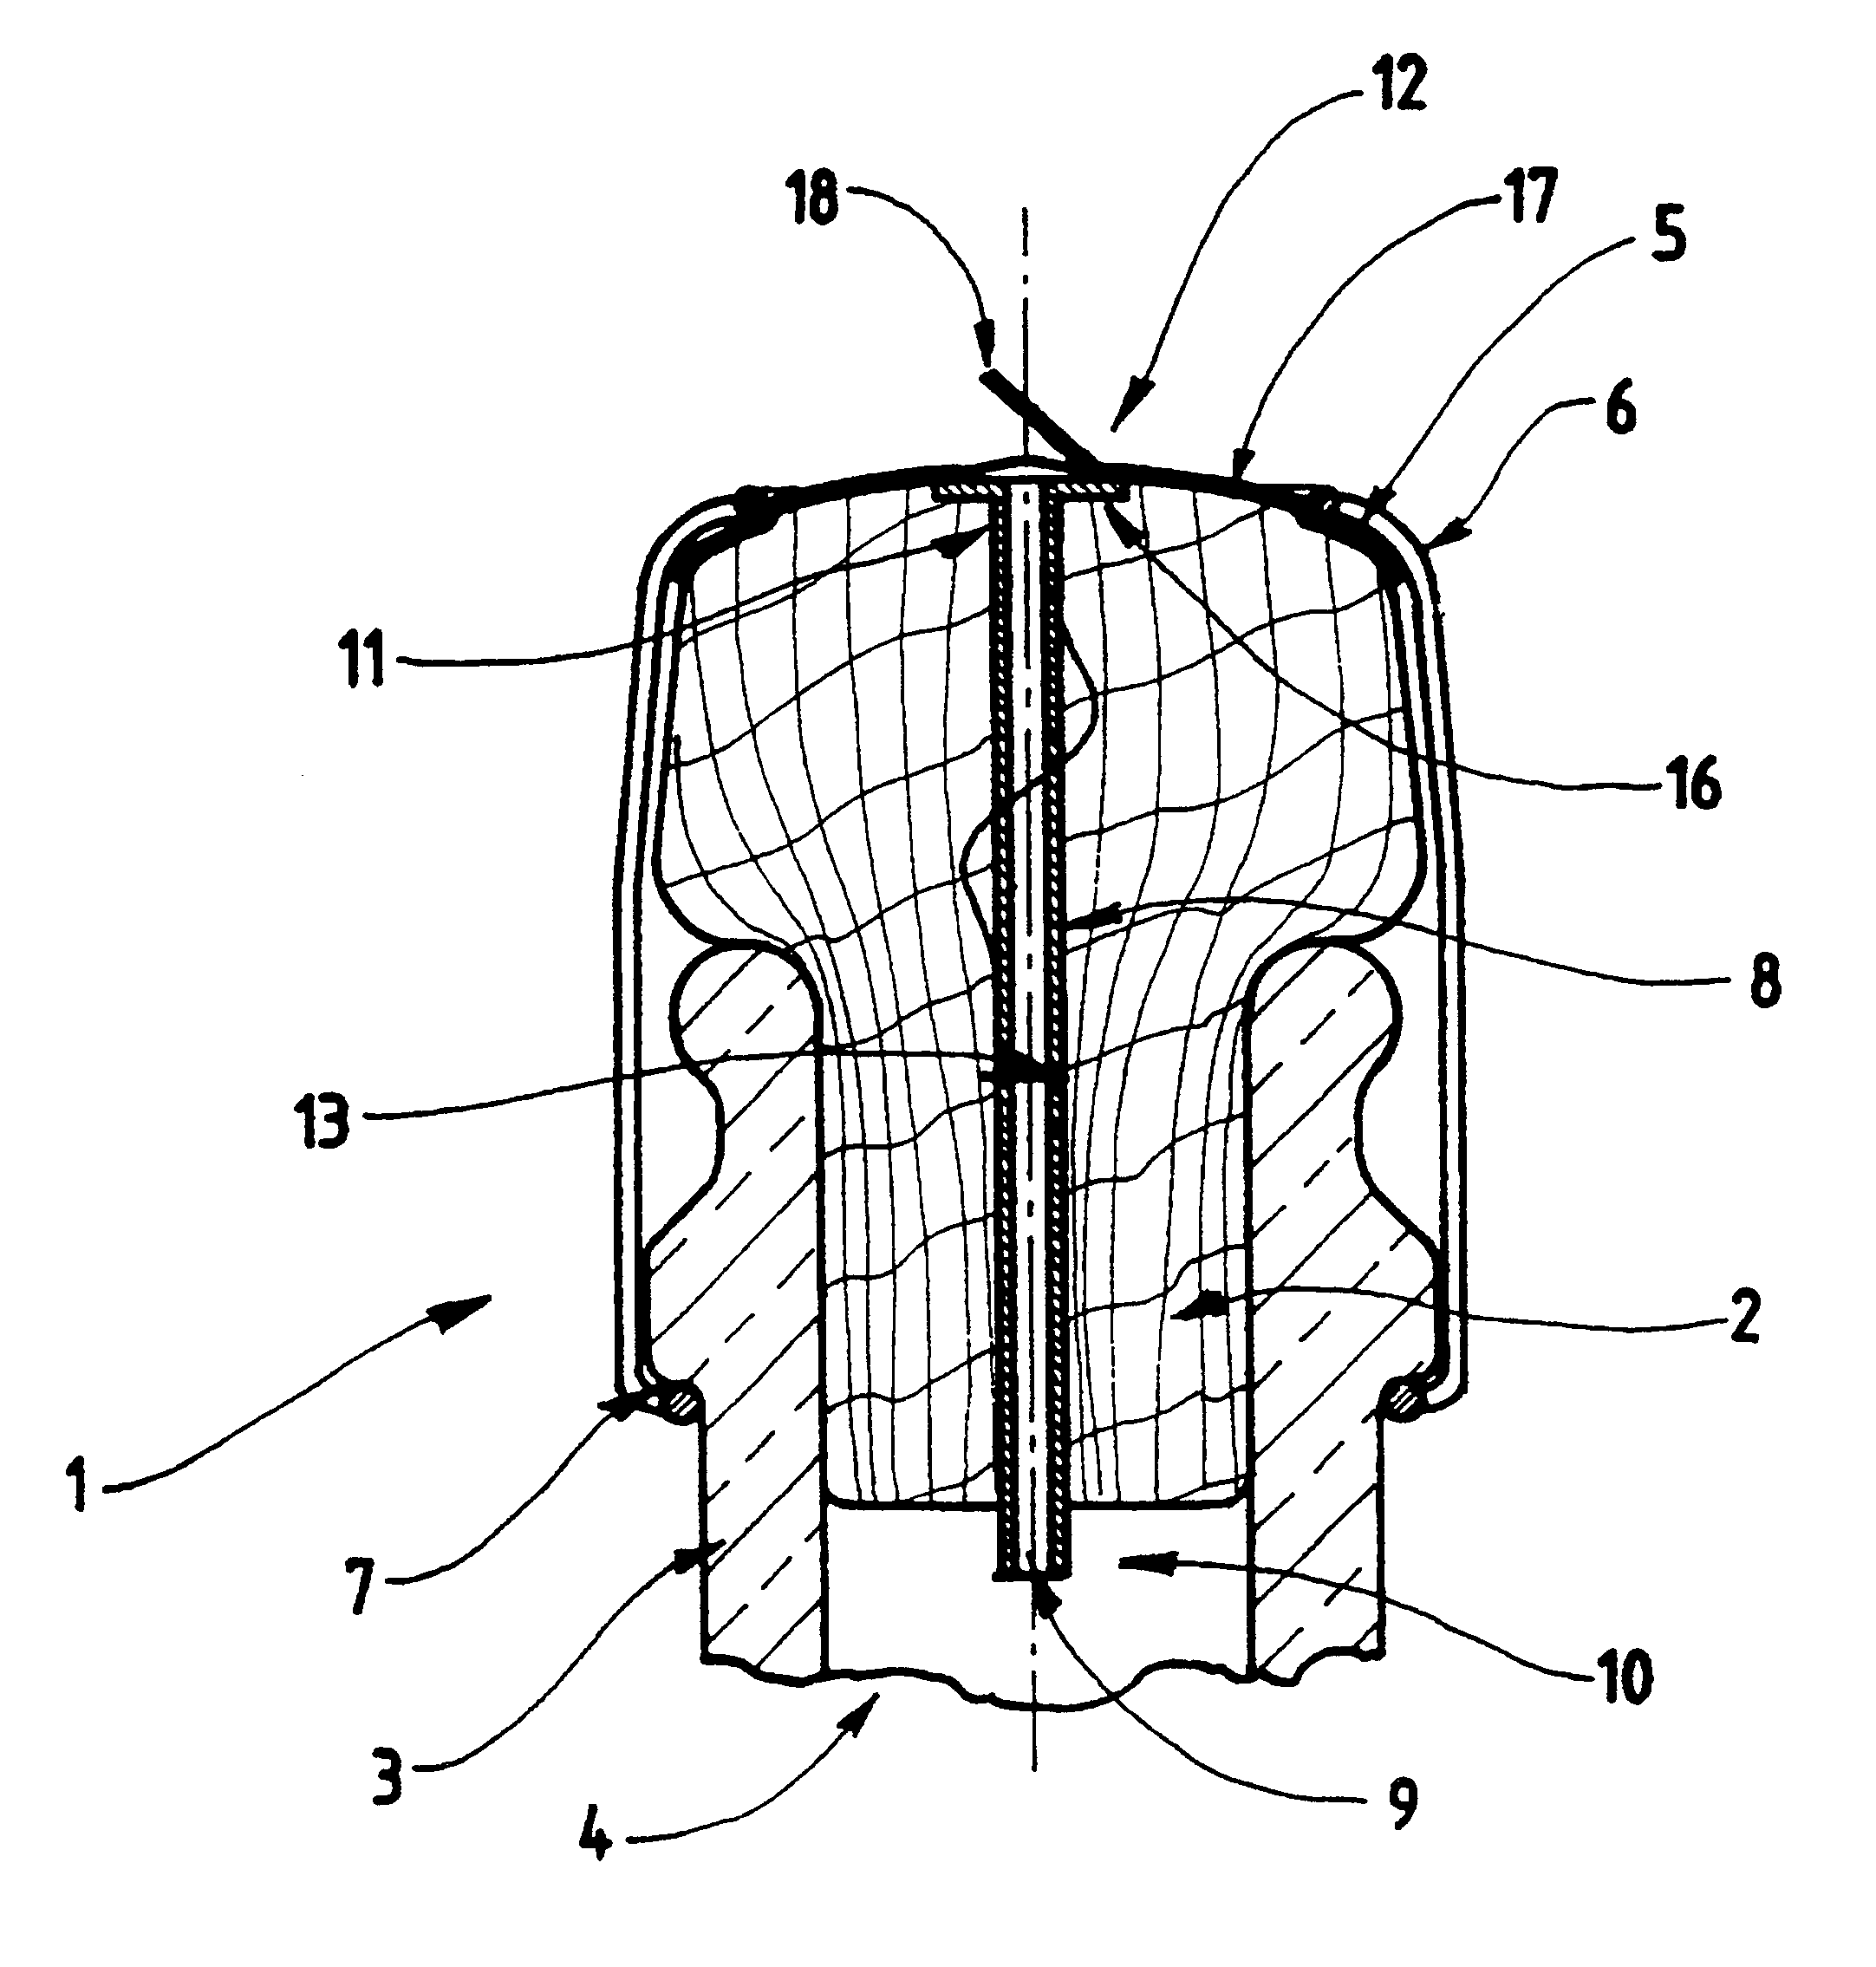 Sealing device for a bottle containing sparkling wine